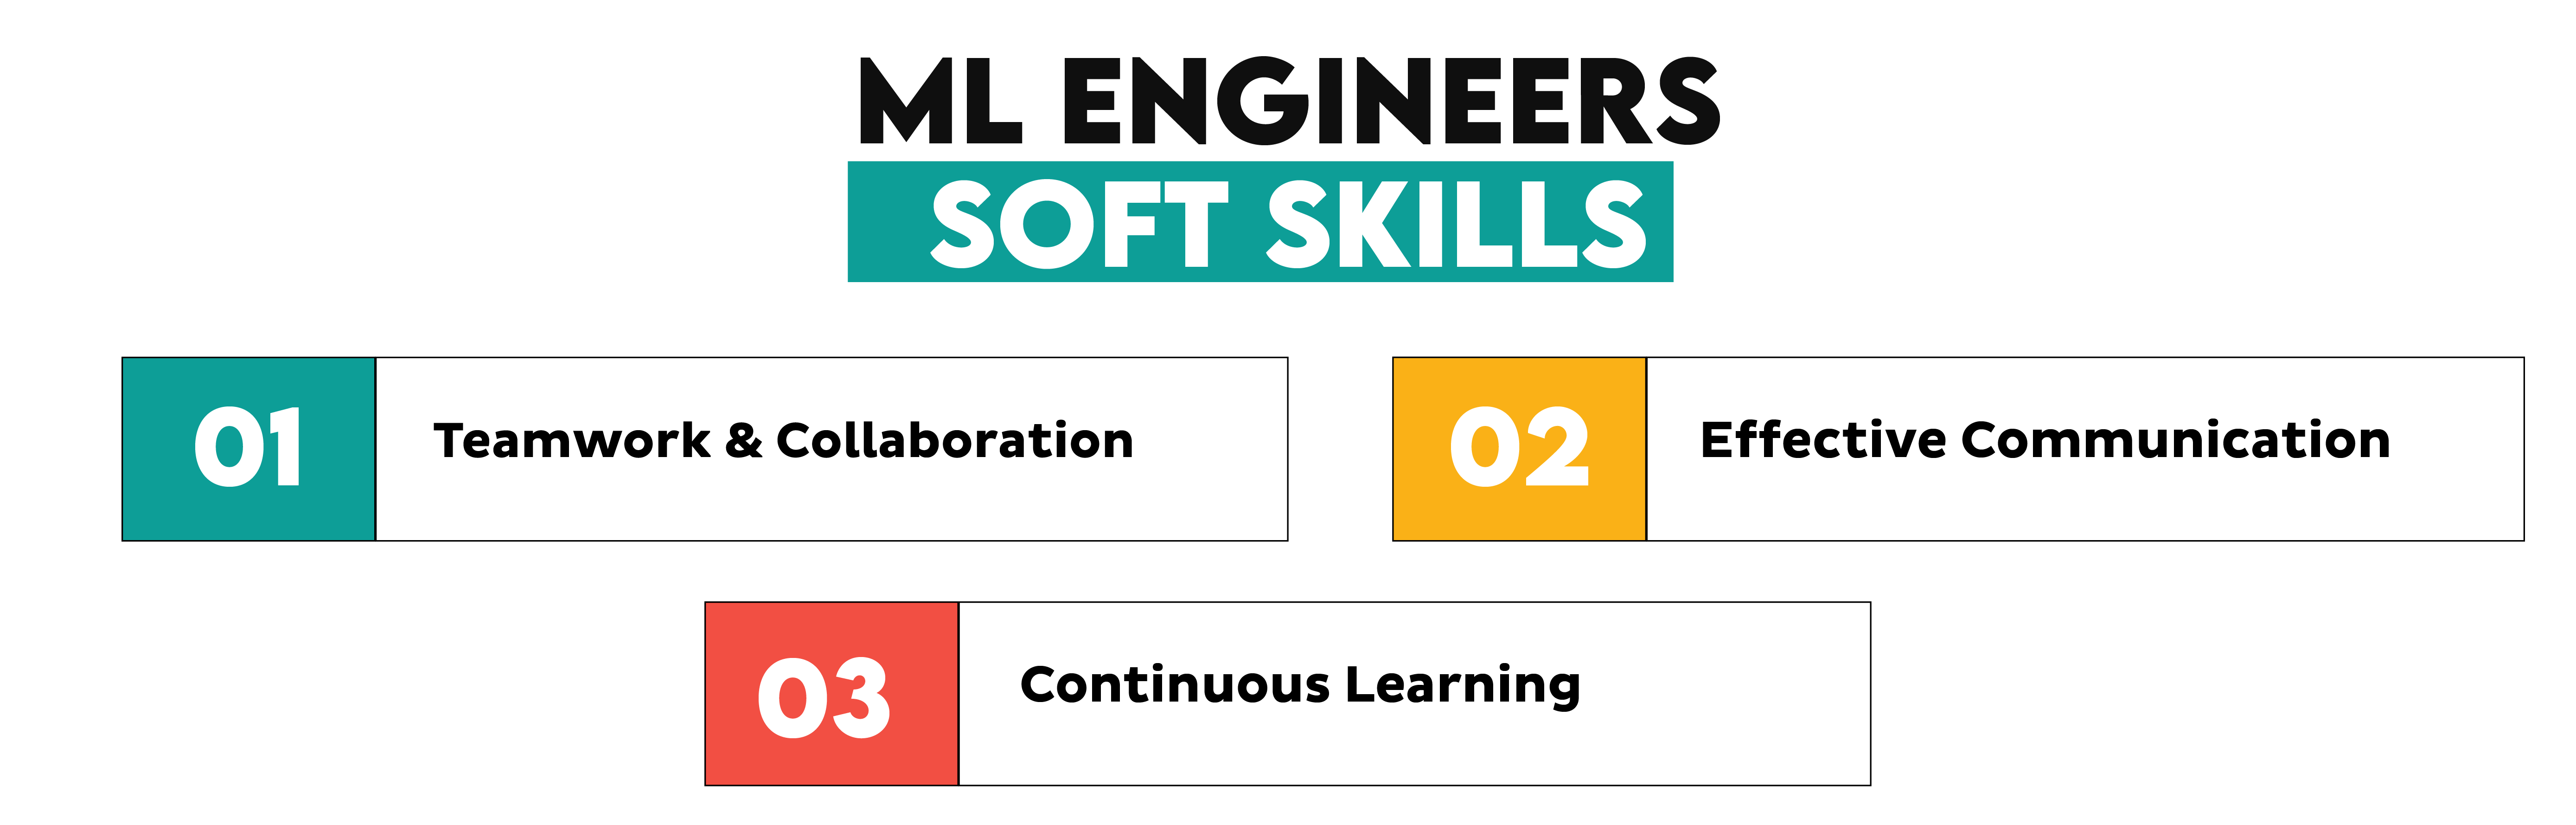 Soft Skills Required to Become a Machine Learning Engineer